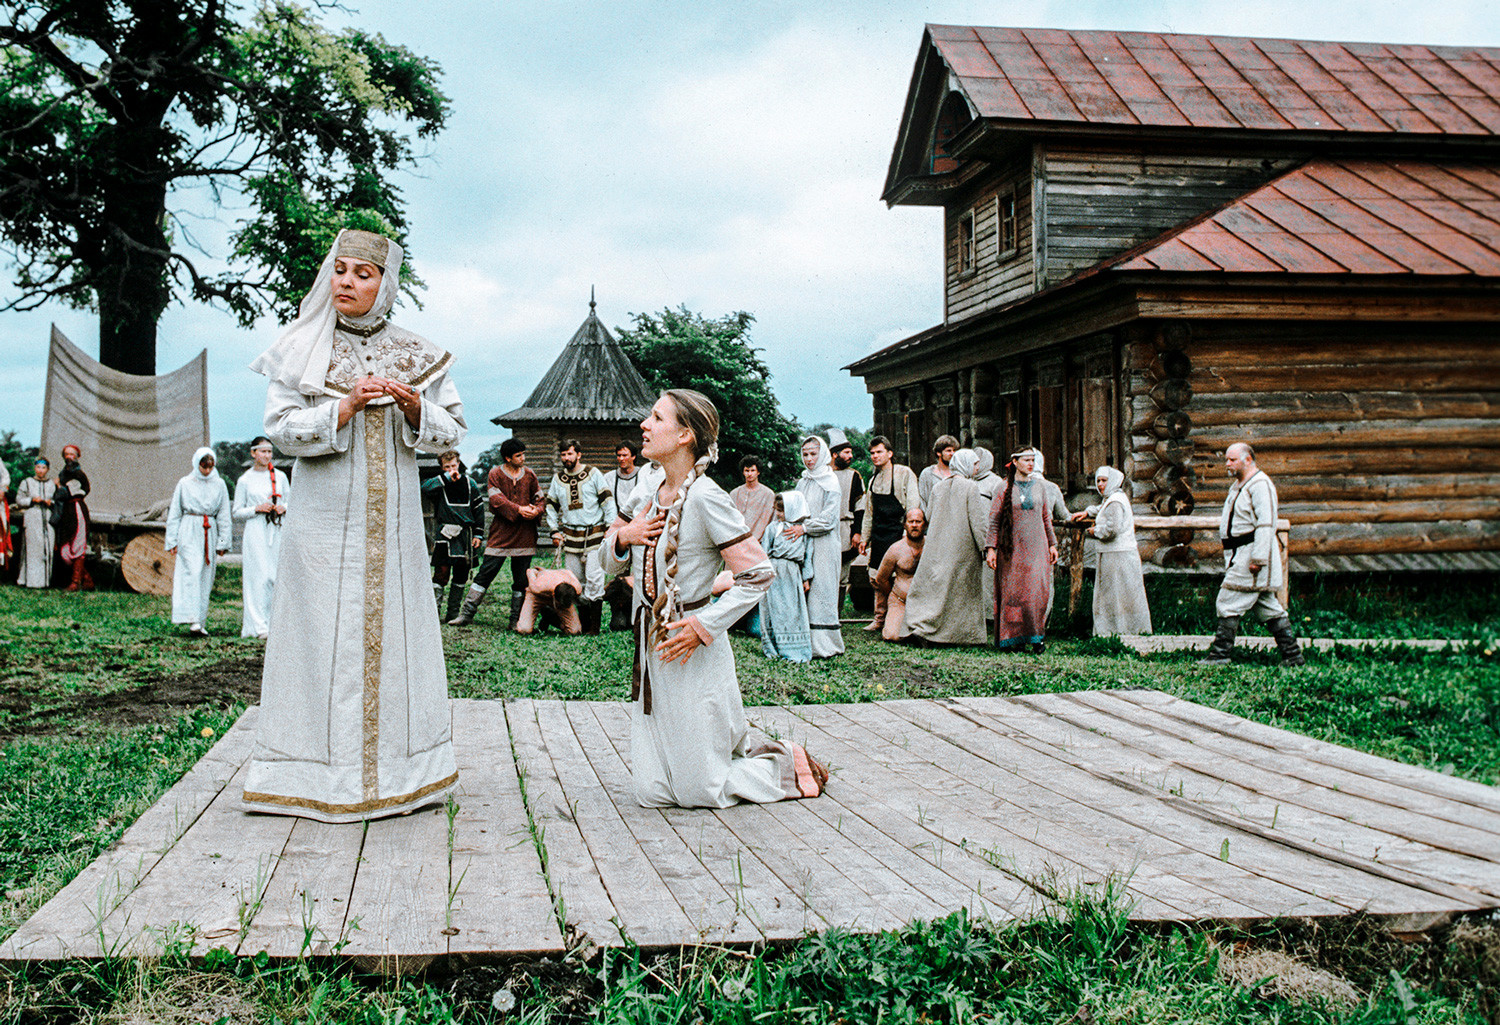 Historical performance in the Museum of Wooden Architecture